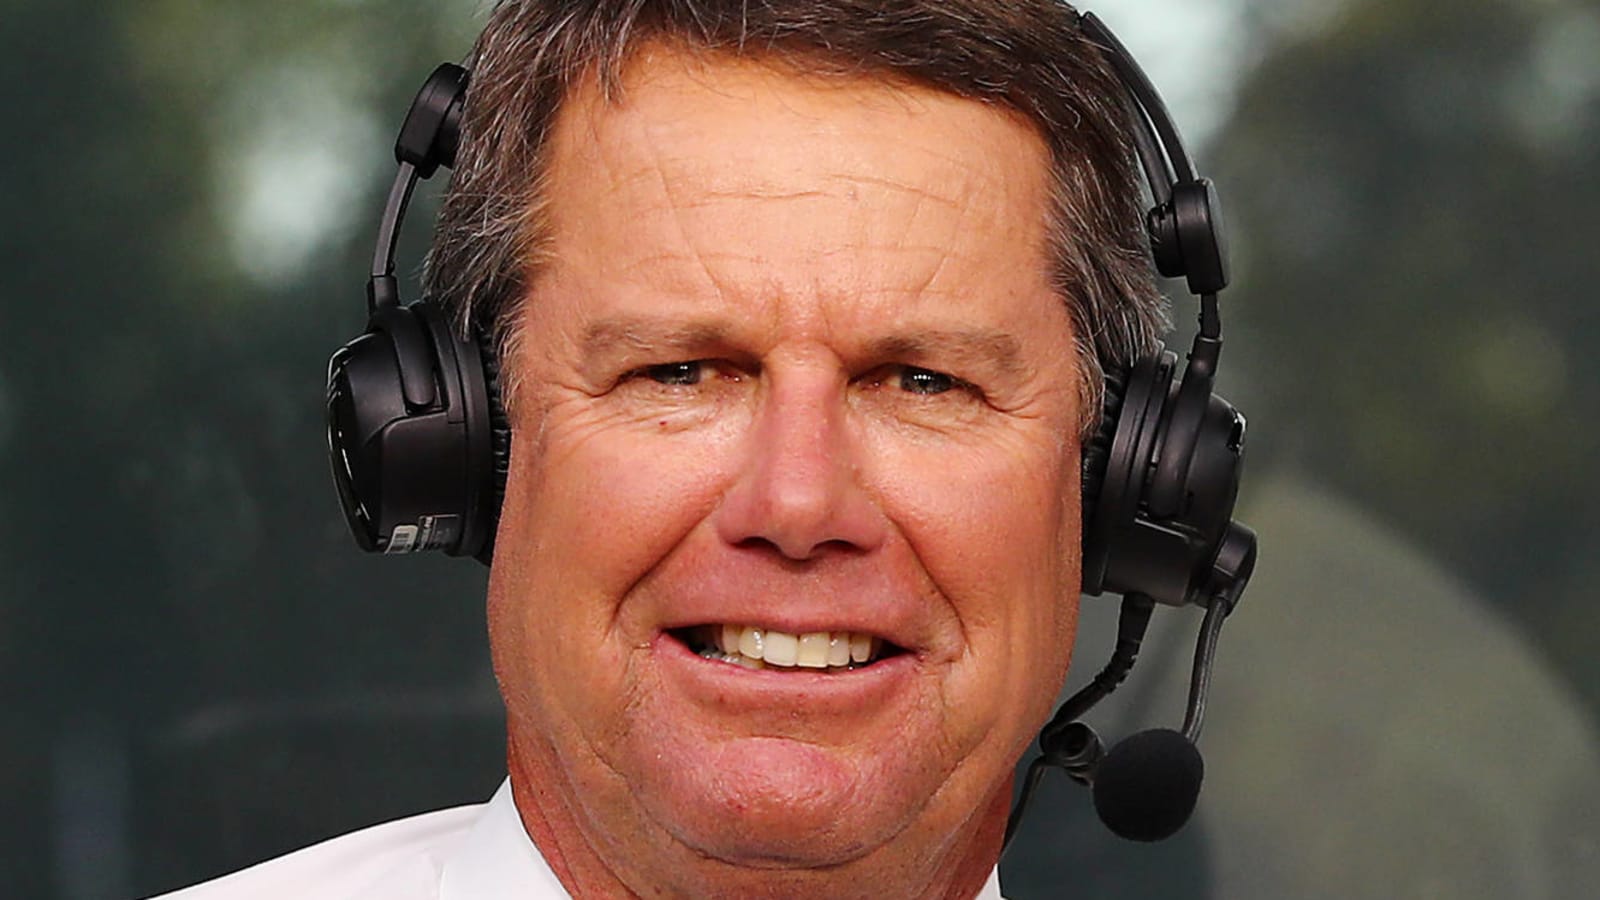 Paul Azinger hilariously trolled Florida St. during Ryder Cup